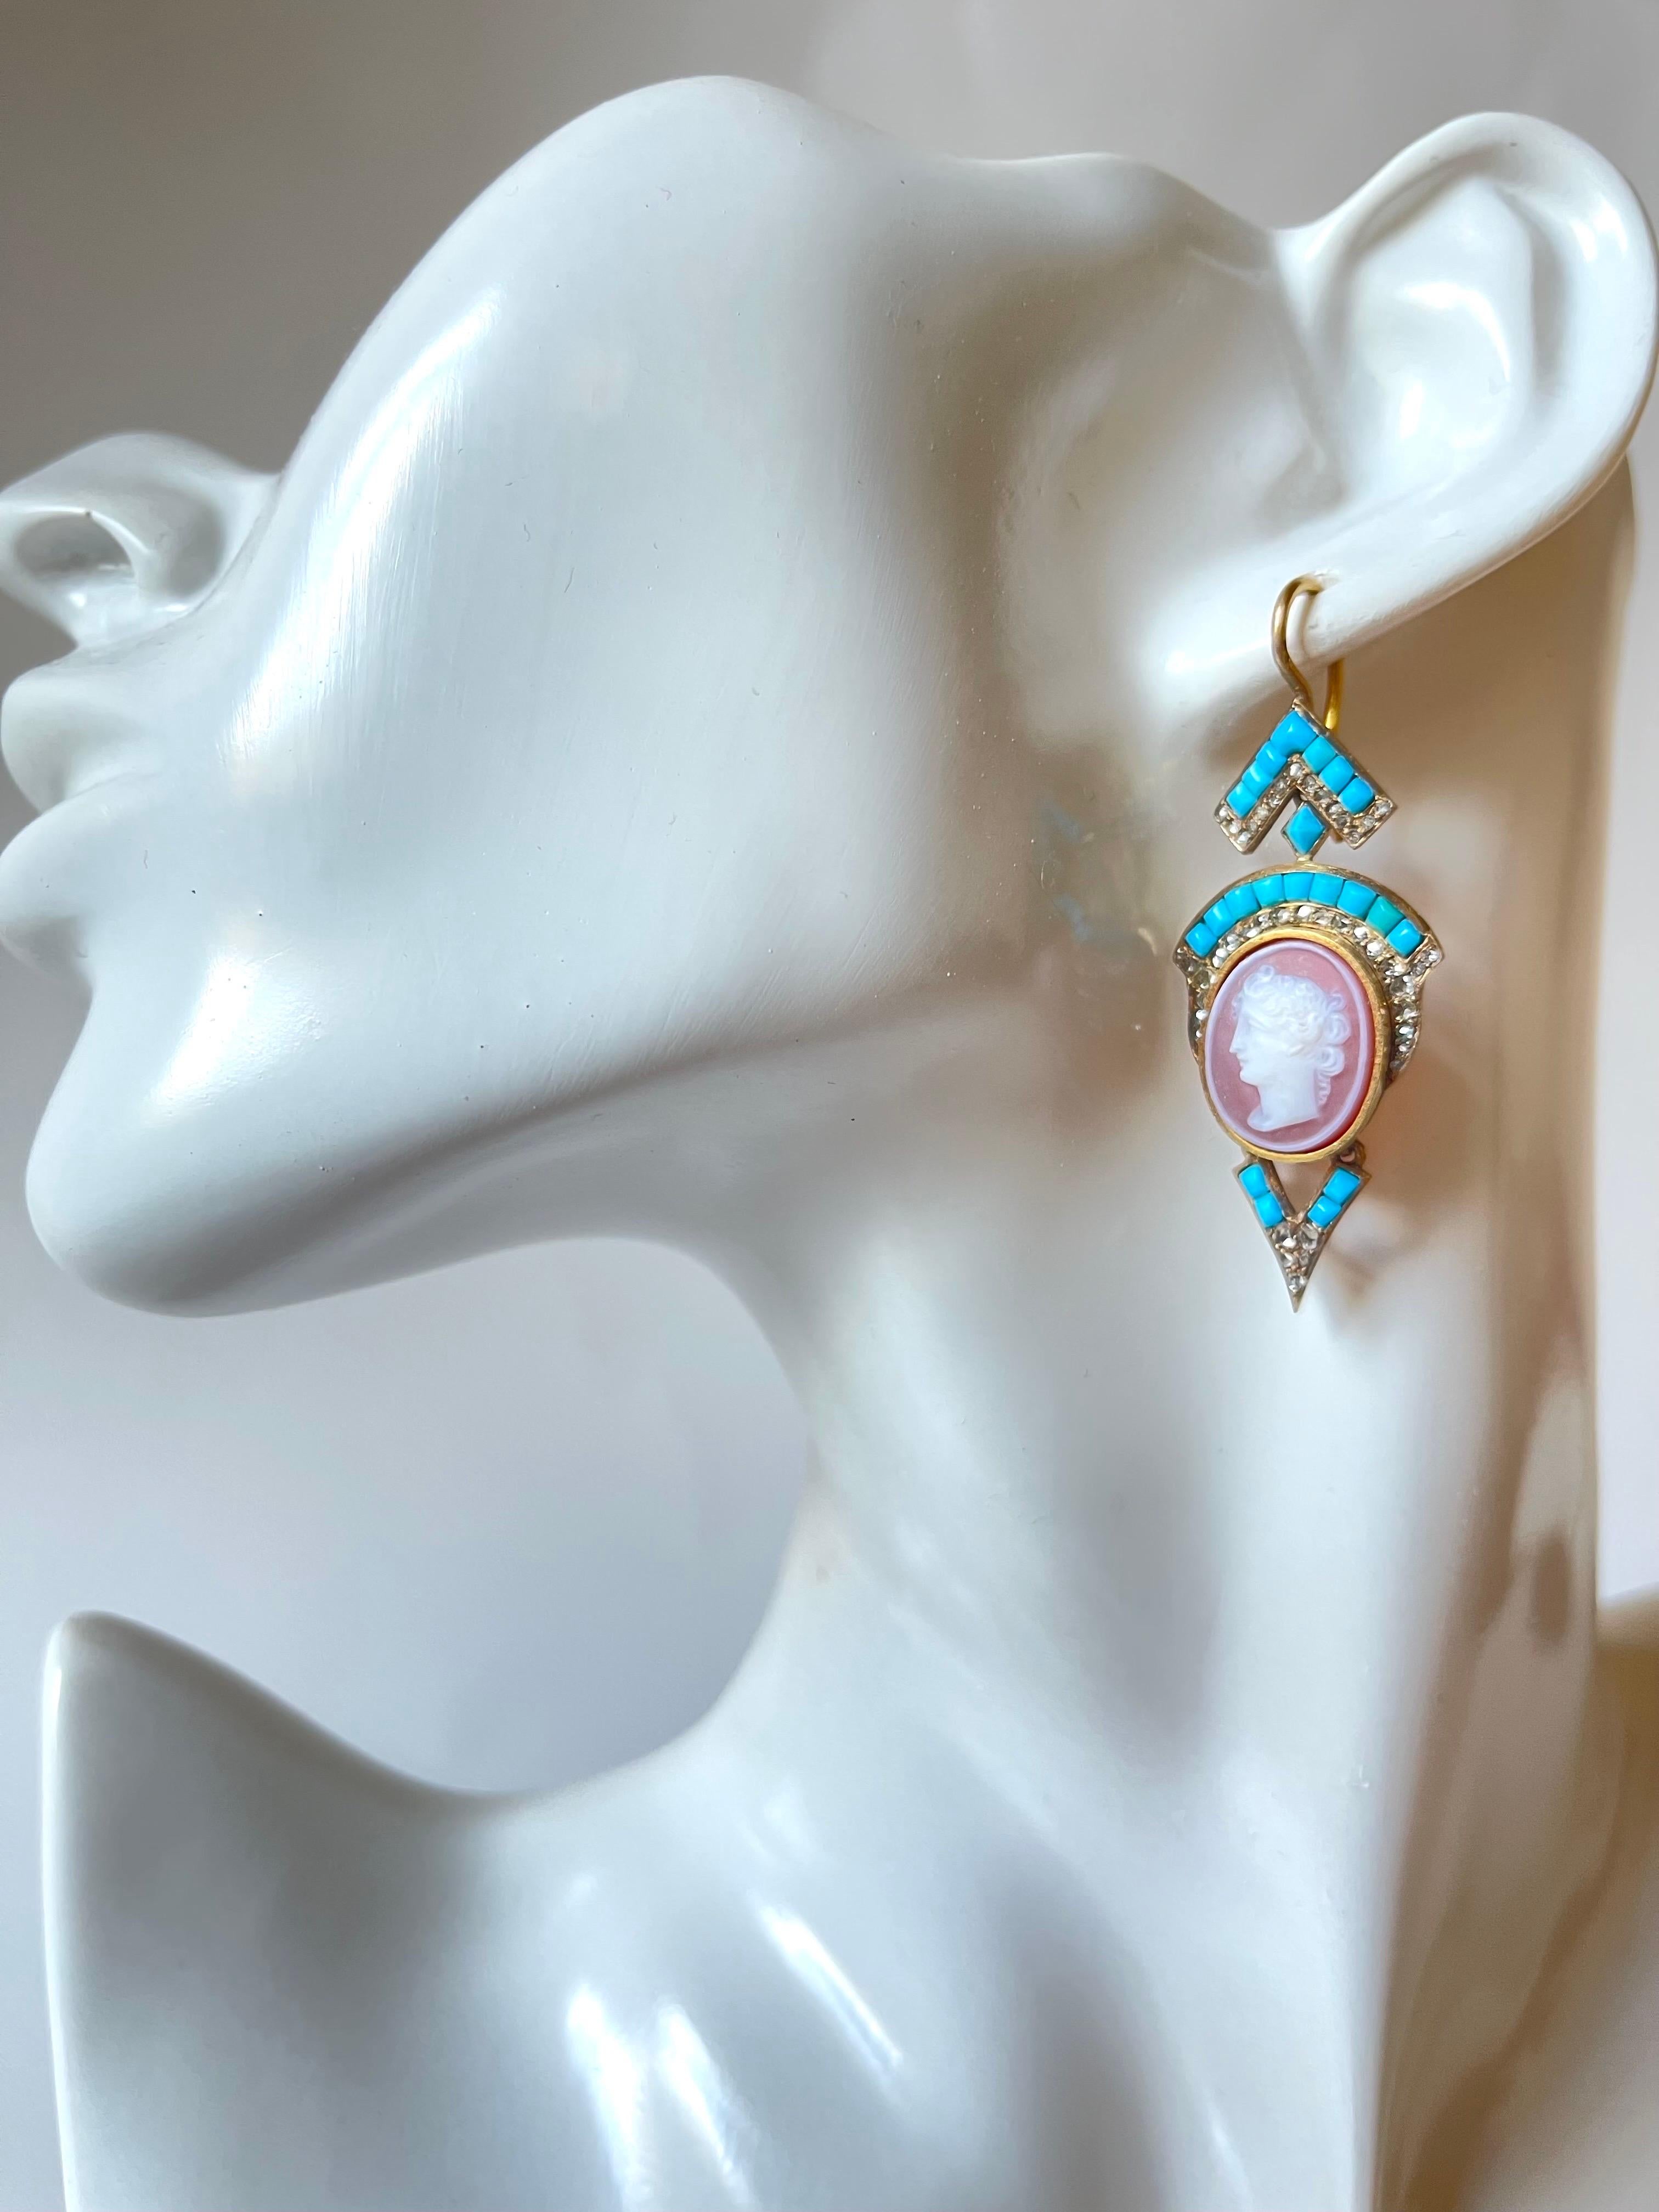 A very fine quality C 1880 French 18K YG pendant earrings with a rare and unusual combination of colors and shapes. The drops are centered with delicately carved classical agate cameos and highlighted by rose cut diamonds and cushion carved natural